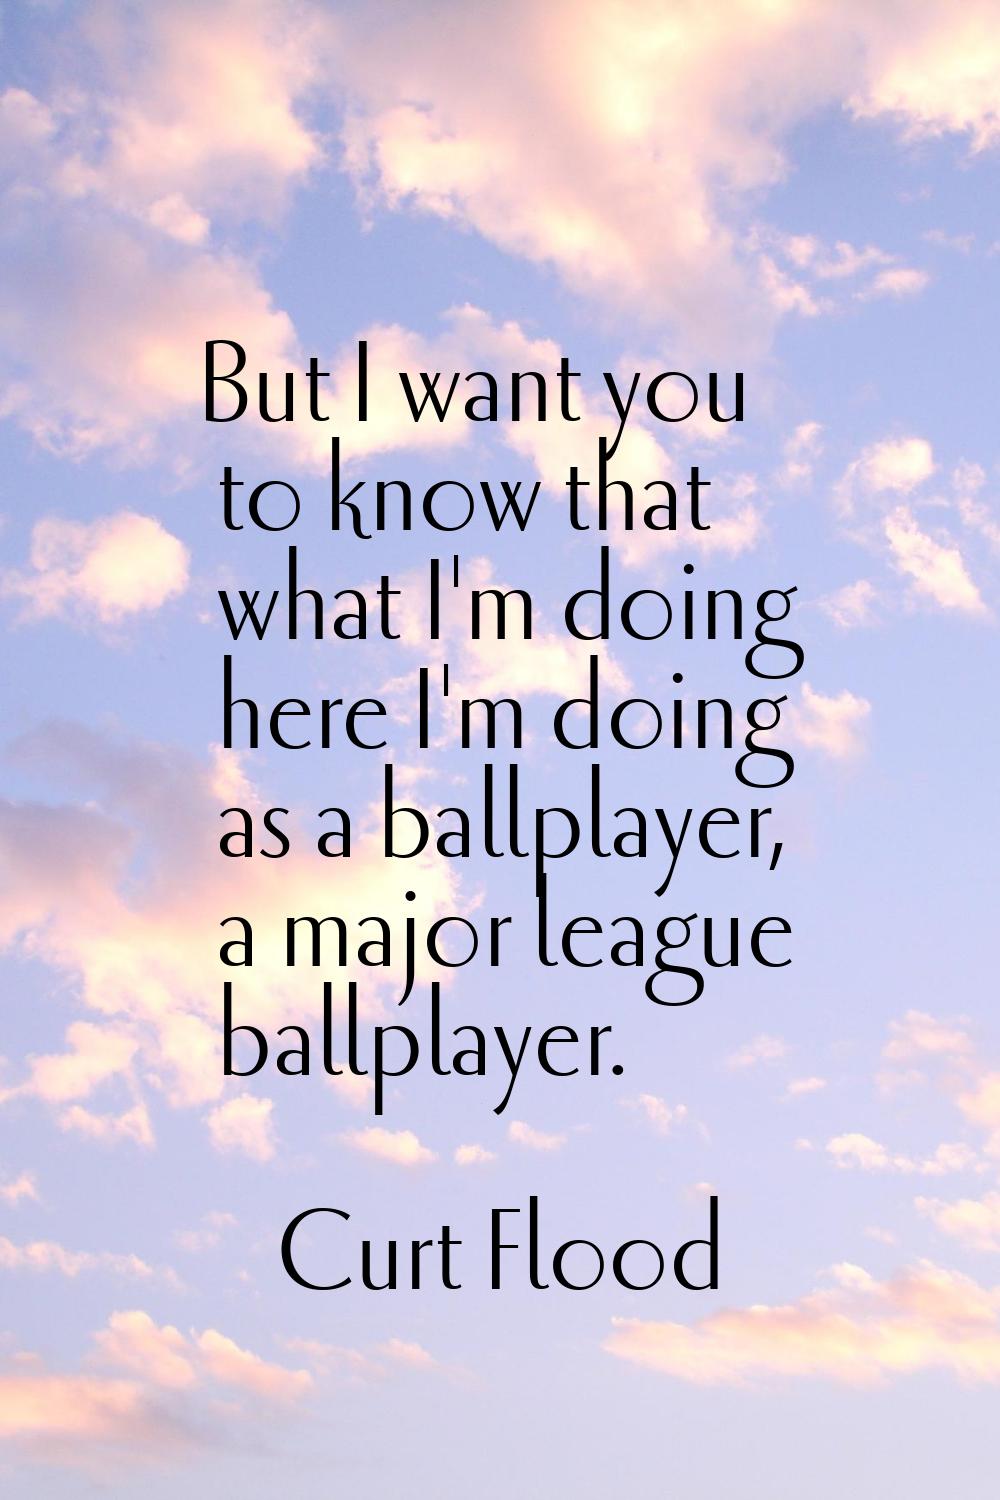 But I want you to know that what I'm doing here I'm doing as a ballplayer, a major league ballplaye